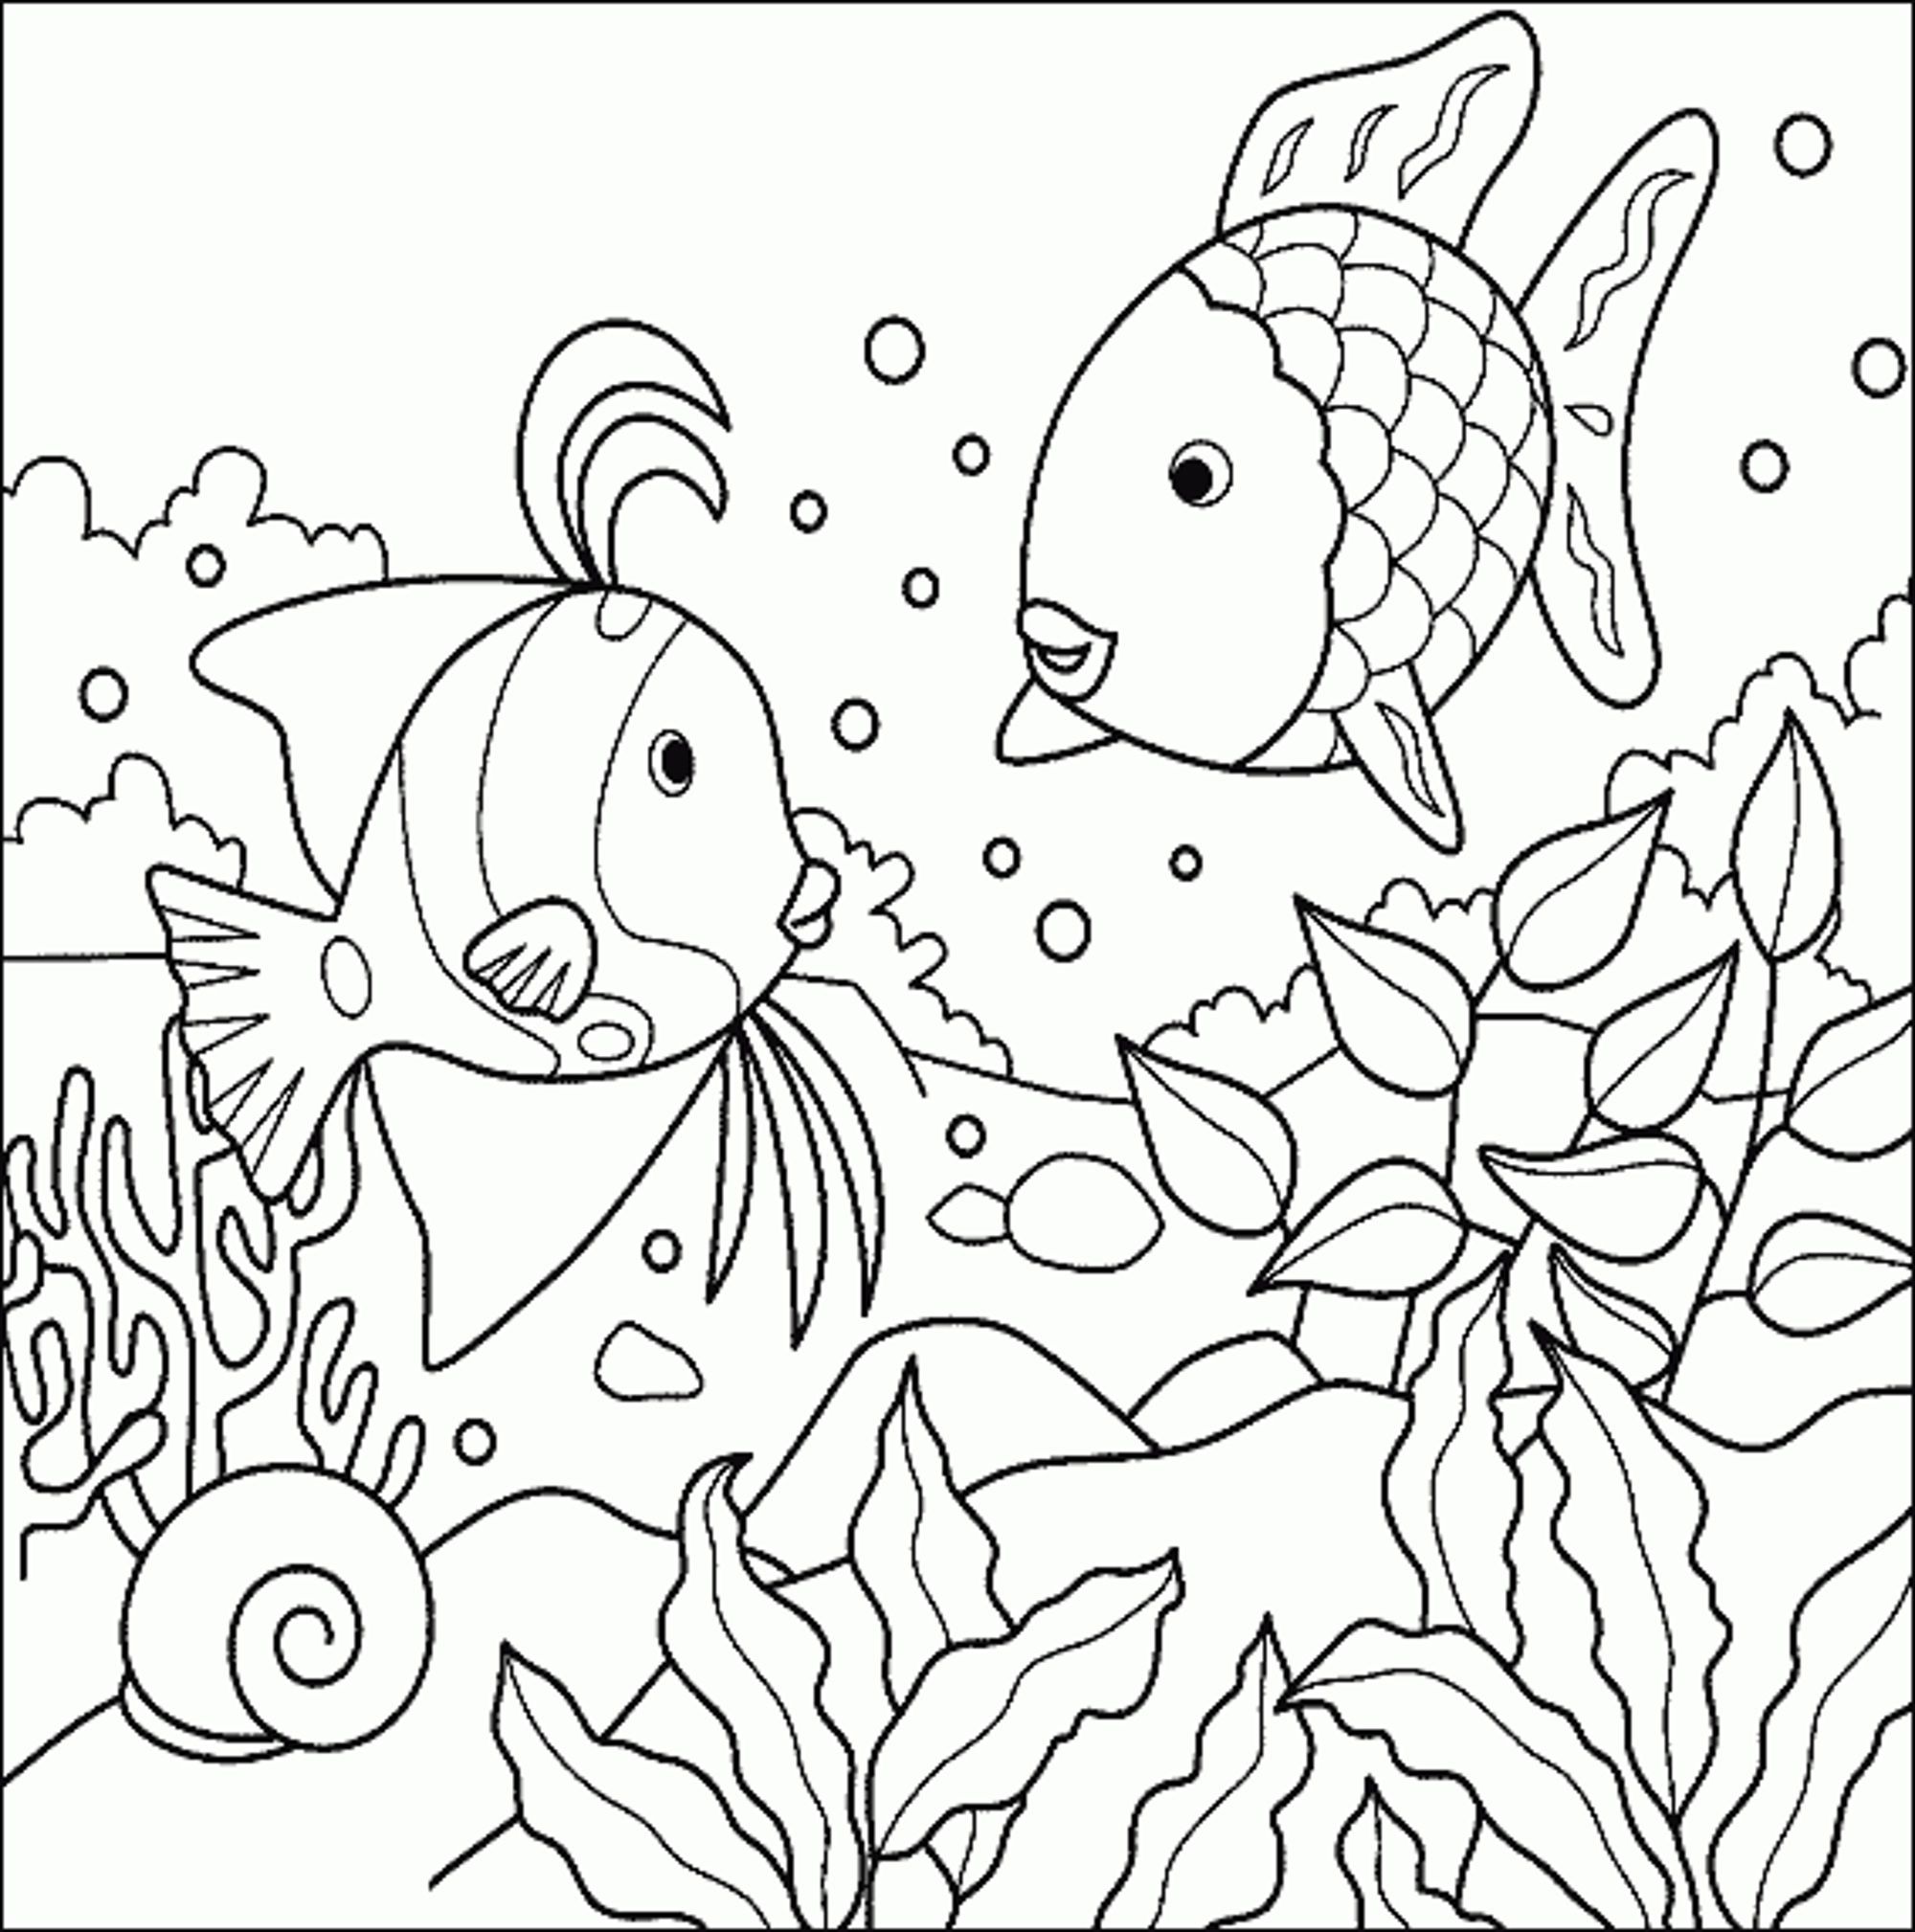 Best Photos of Tropical Fish Coloring Pages Free - Realistic Fish ...